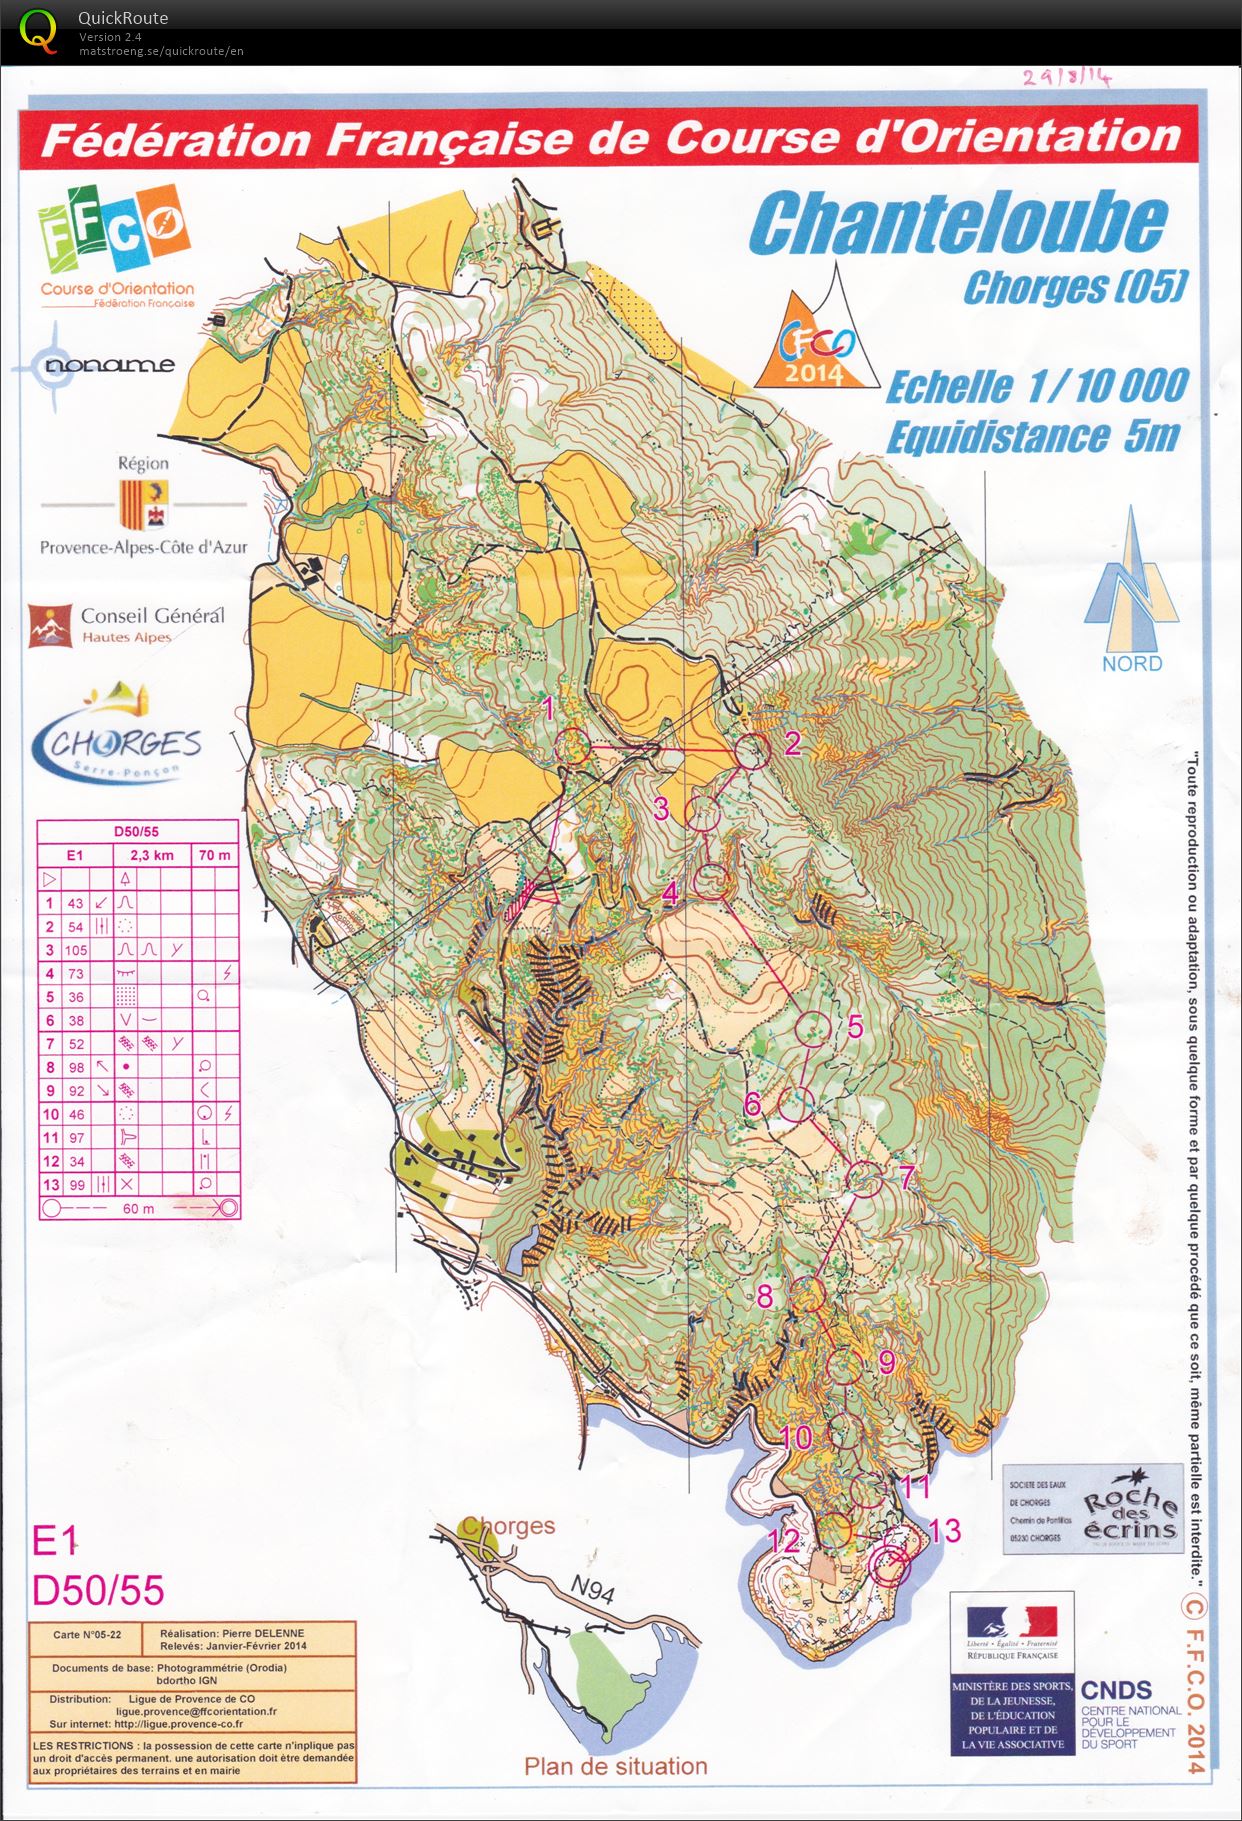 CFCO2014: Moyenne Distance (29/08/2014)